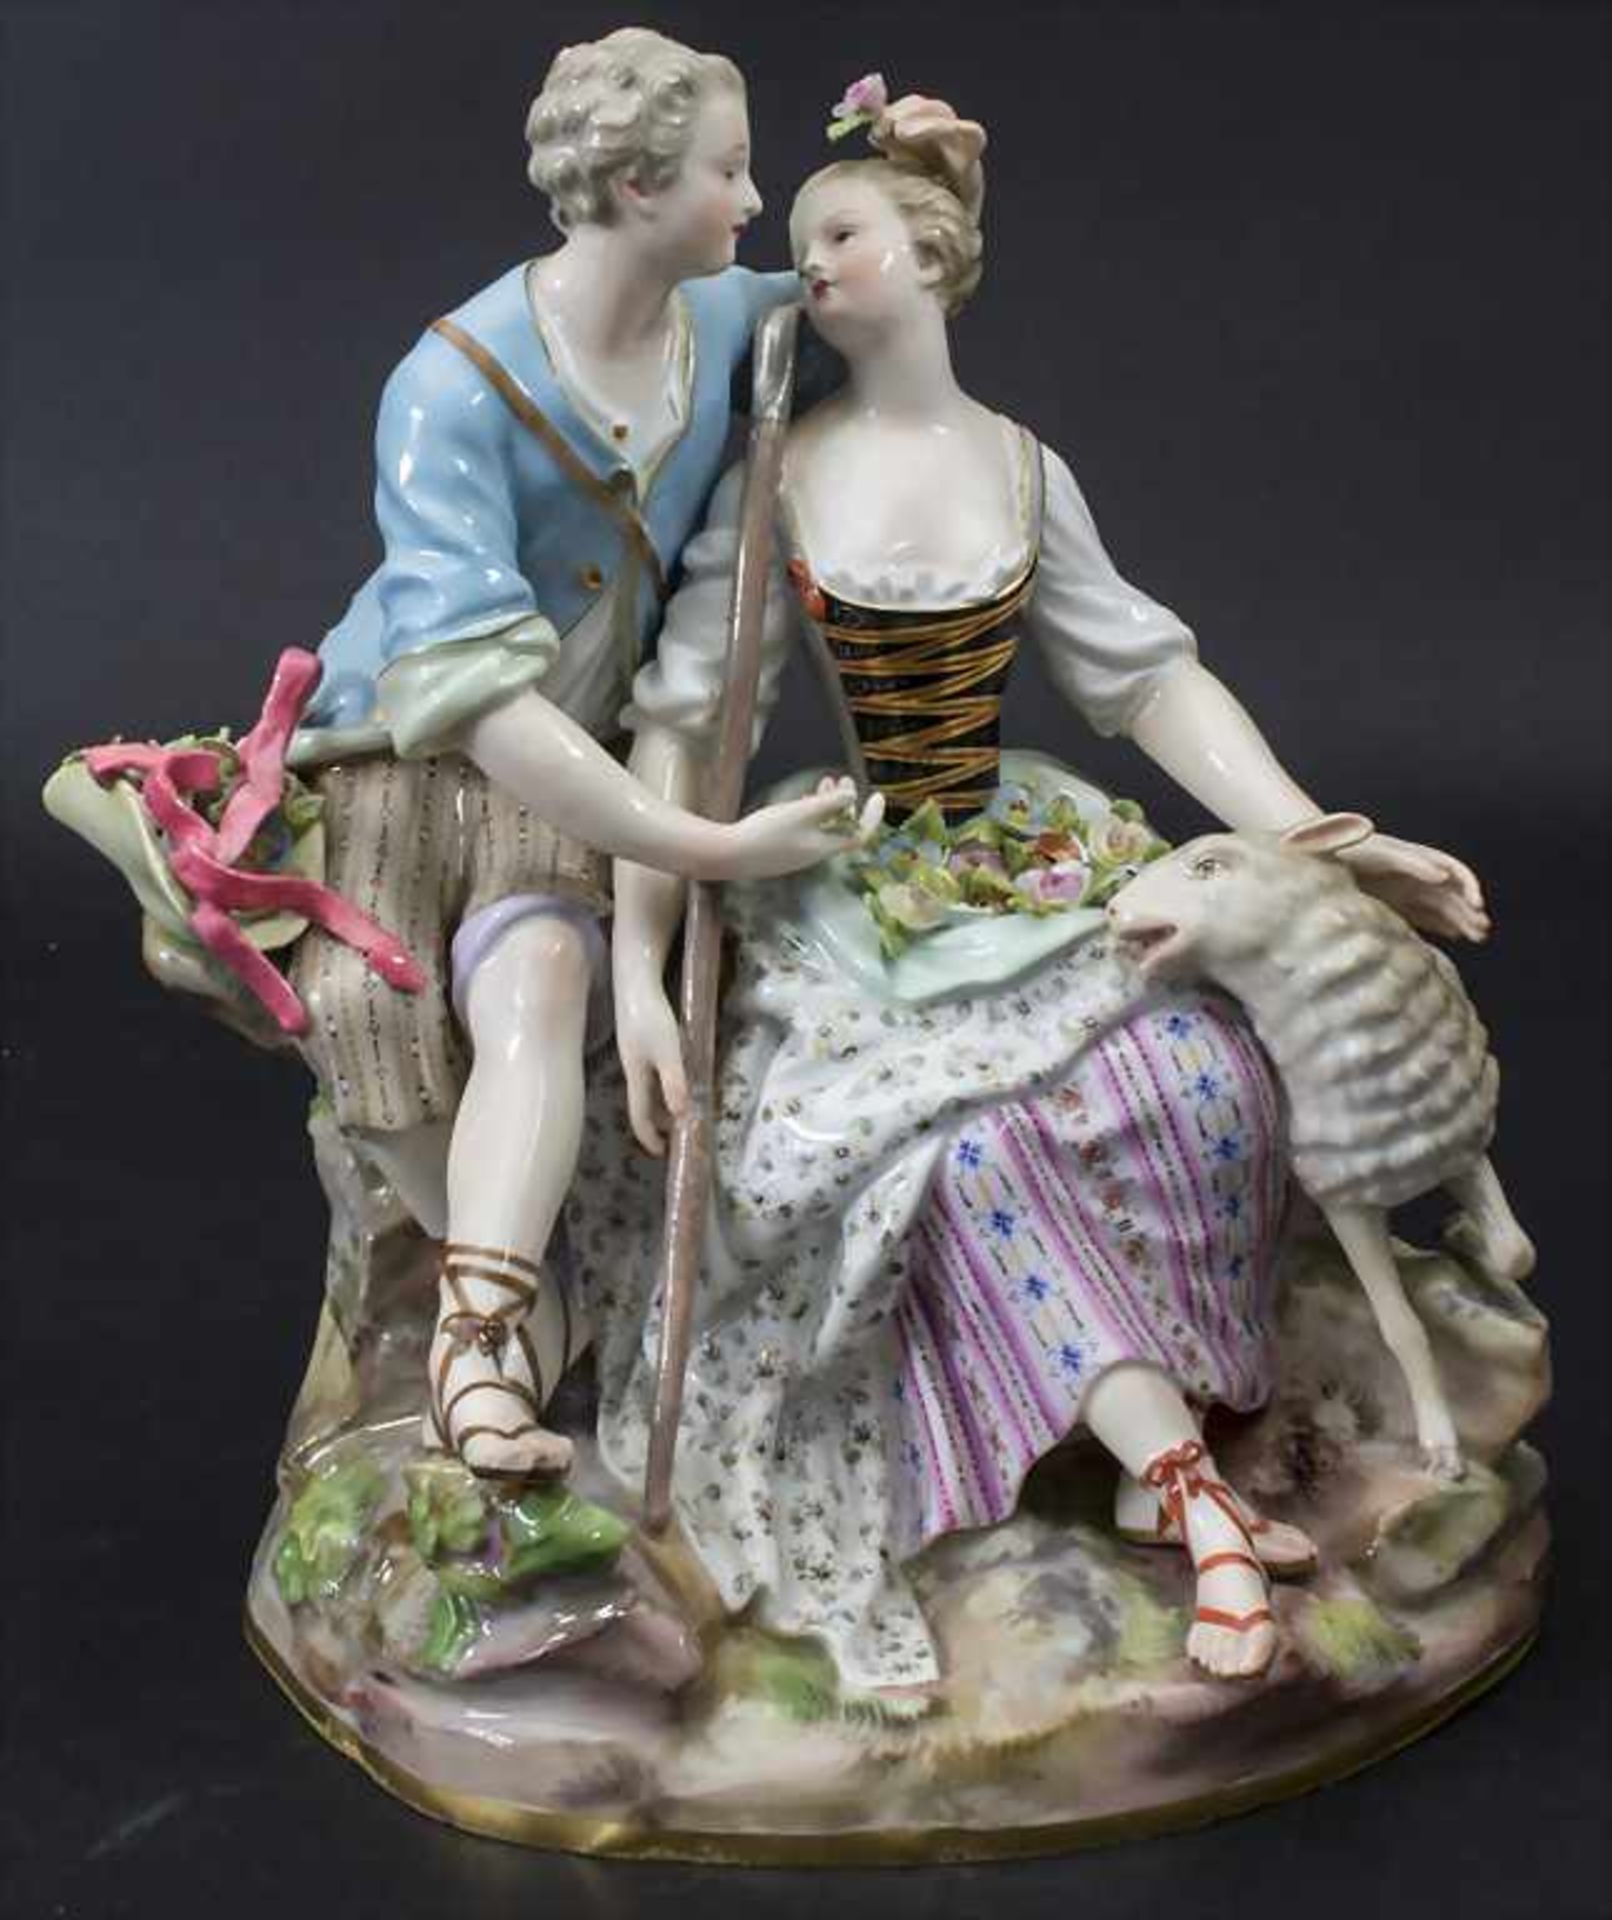 Schäfergruppe / A figural group with a shepherd and a shepherdess, Meissen, 19. Jh.Ma